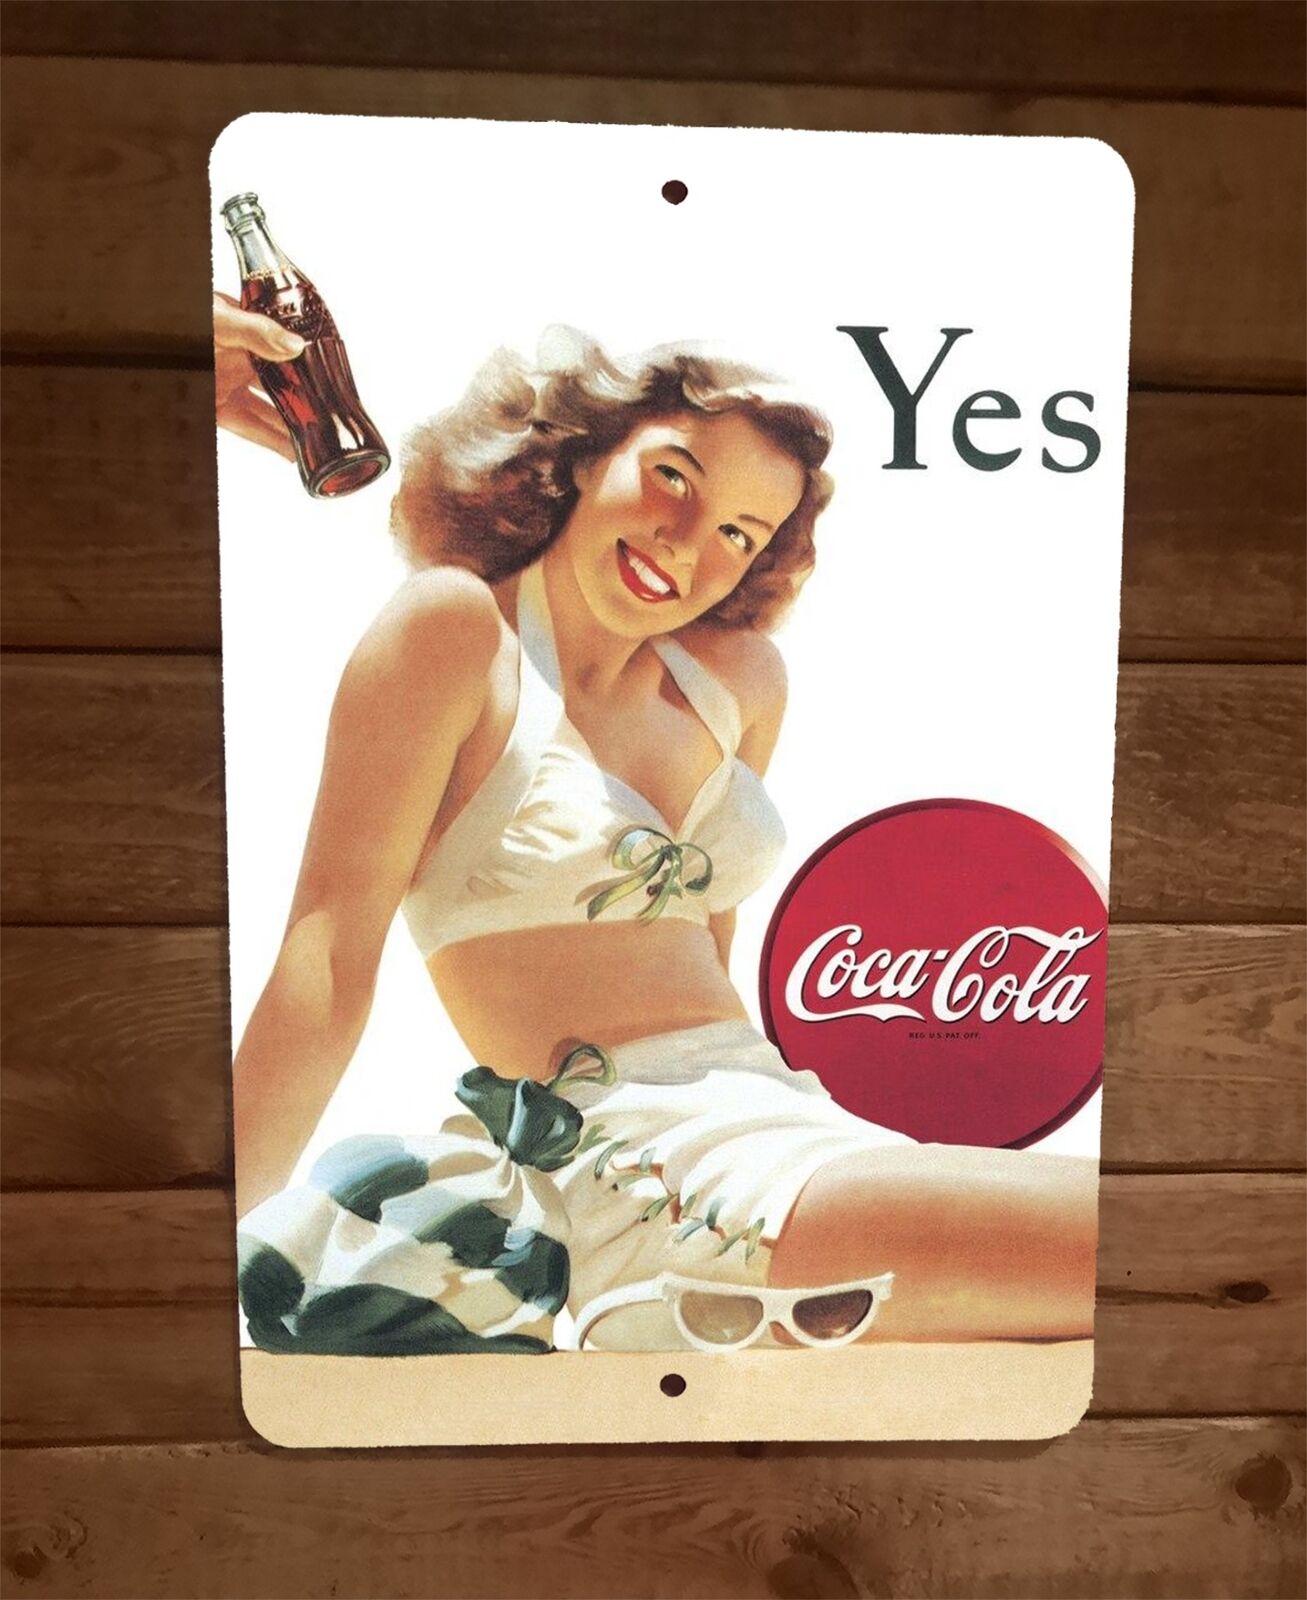 Vintage Look Yes Coca Cola Pinup Girl 8x12 Metal Wall Sign Poster Coke